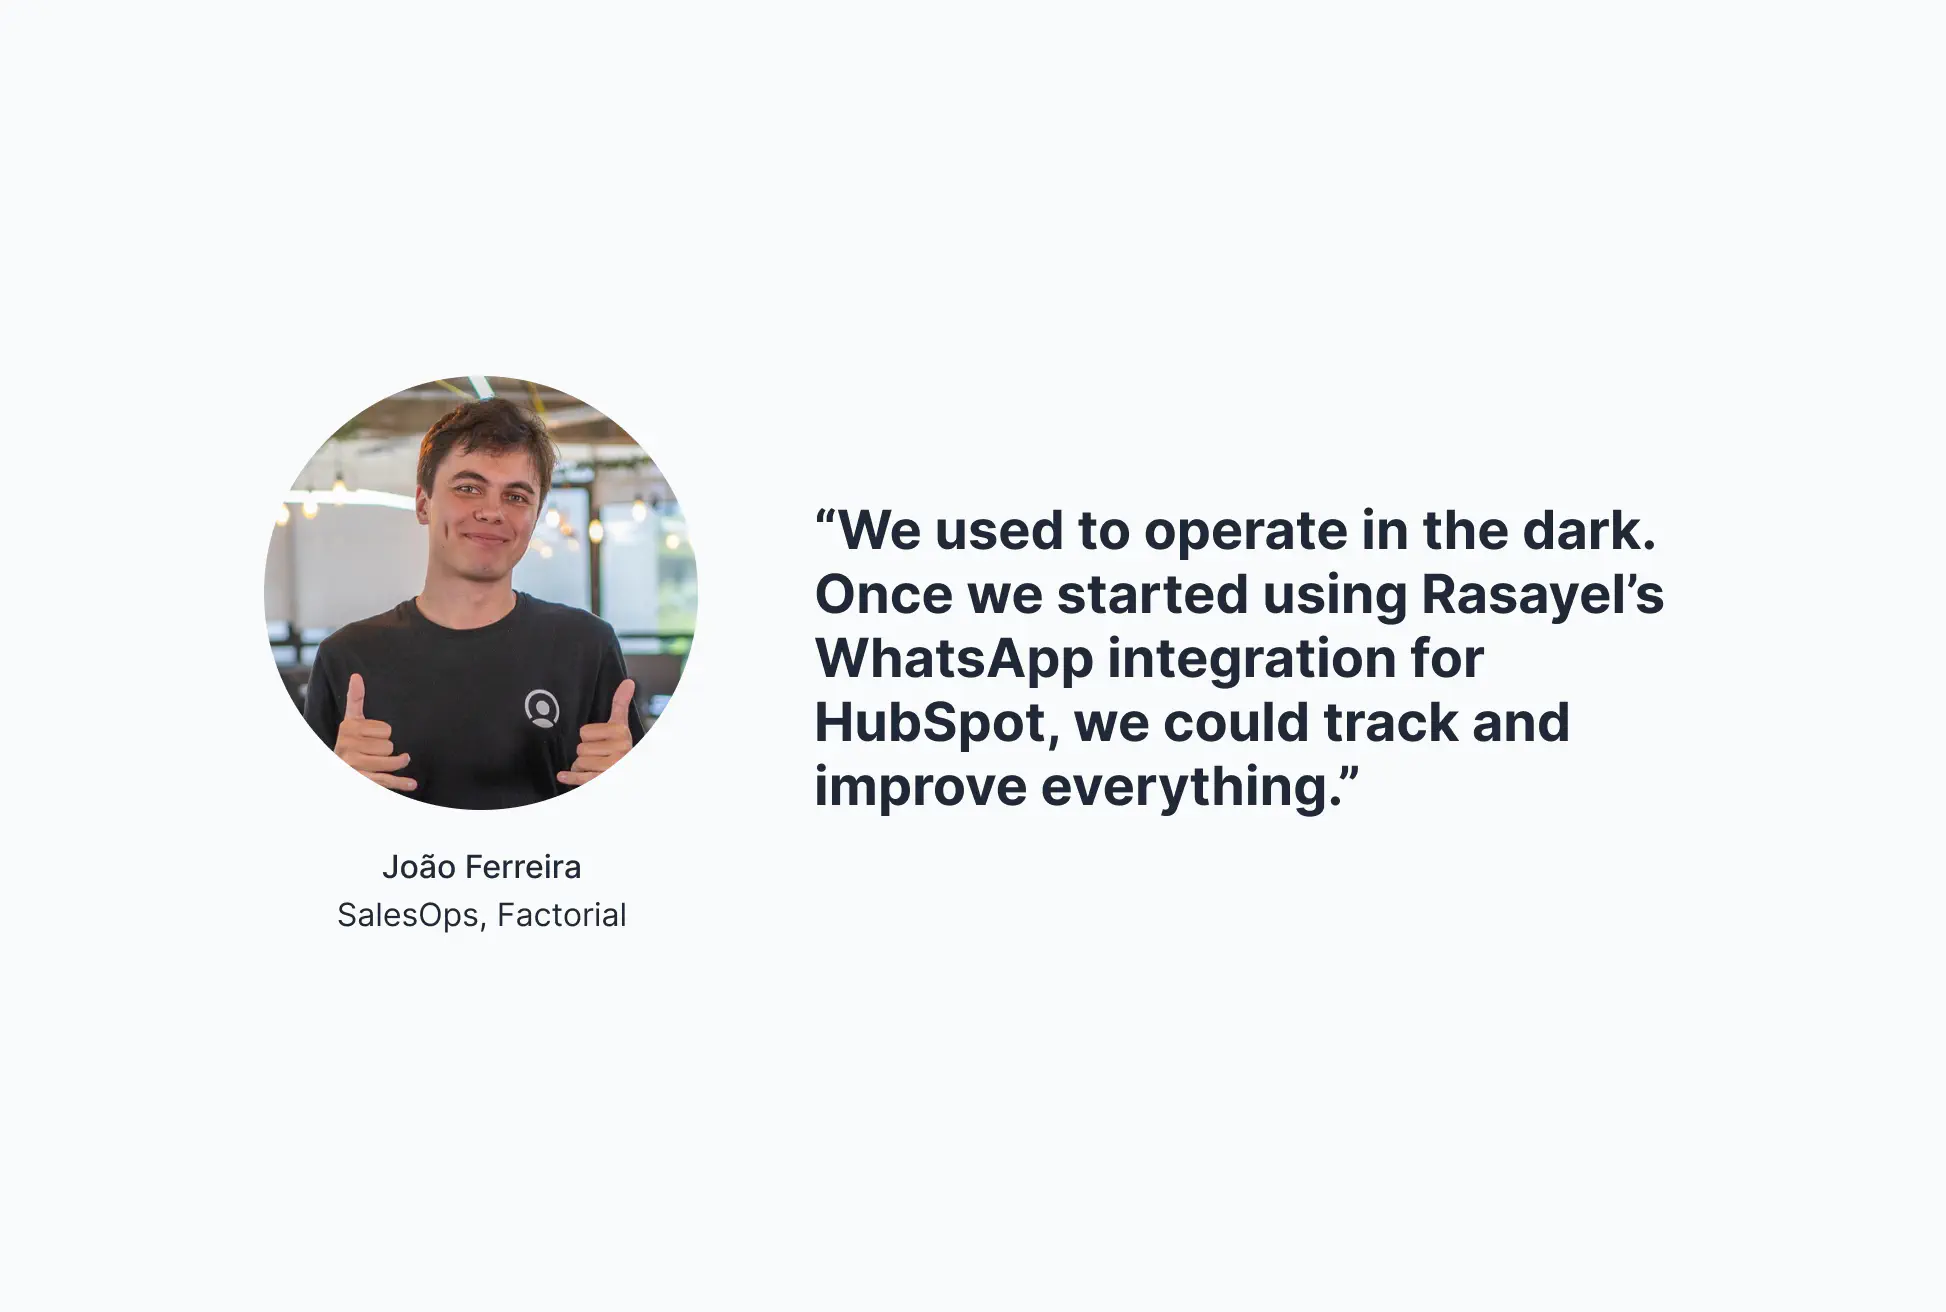 A quote by João Ferreira explaining the benefit of using Rasayel&rsquo;s WhatsApp integration for HubSpot.